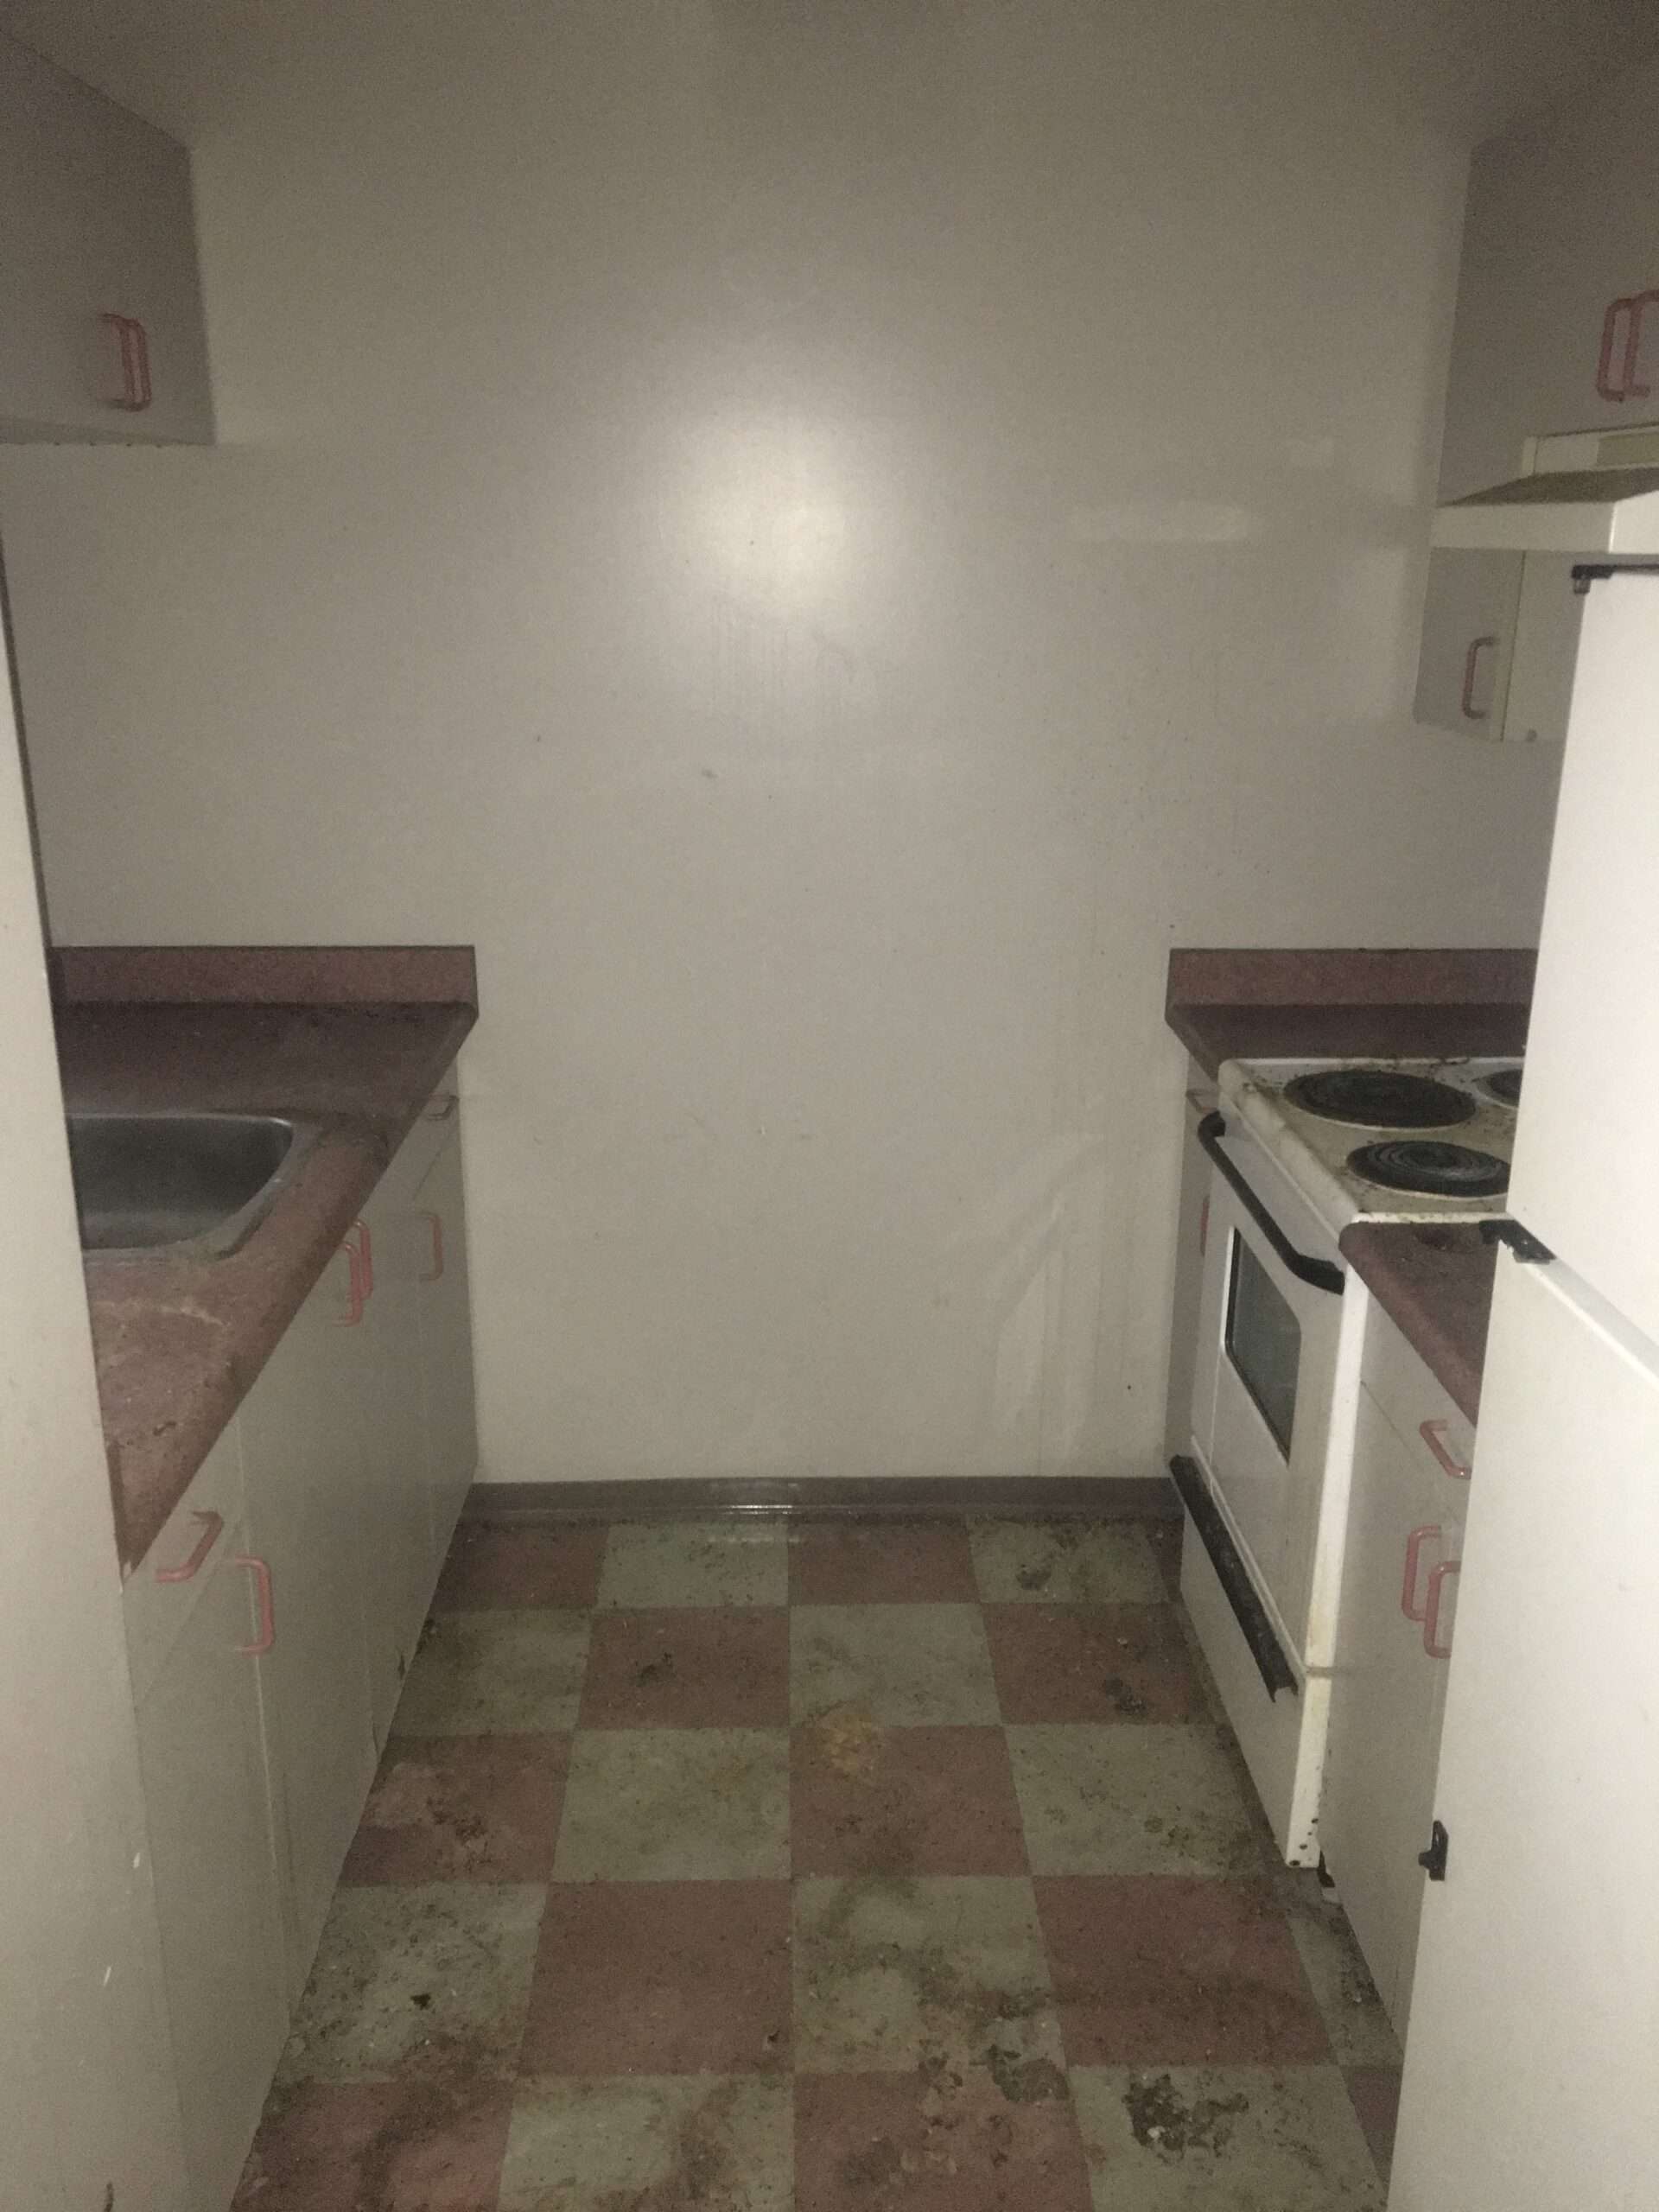 A clean kitchen after a hoarding removal in Delta.